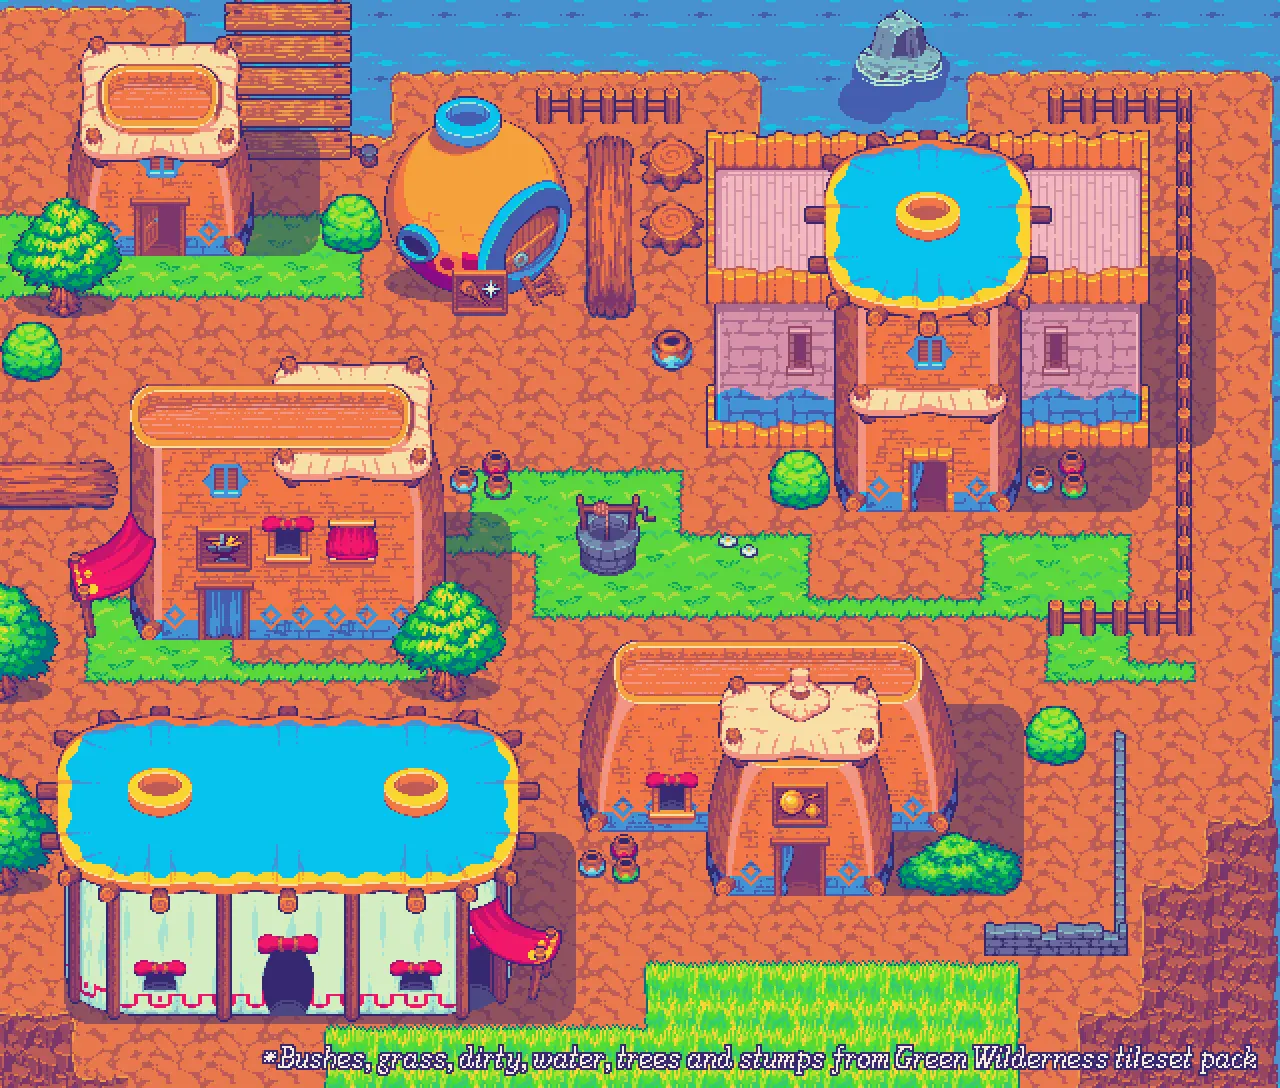 Pixelart showcasing the usage of the Nearby Village asset pack. The village is colourful and the builds are rather unusual, with round colourful buildings. There are also white, red and blue tent-like buildings and orange brick semi-round buildings with straw roofs.